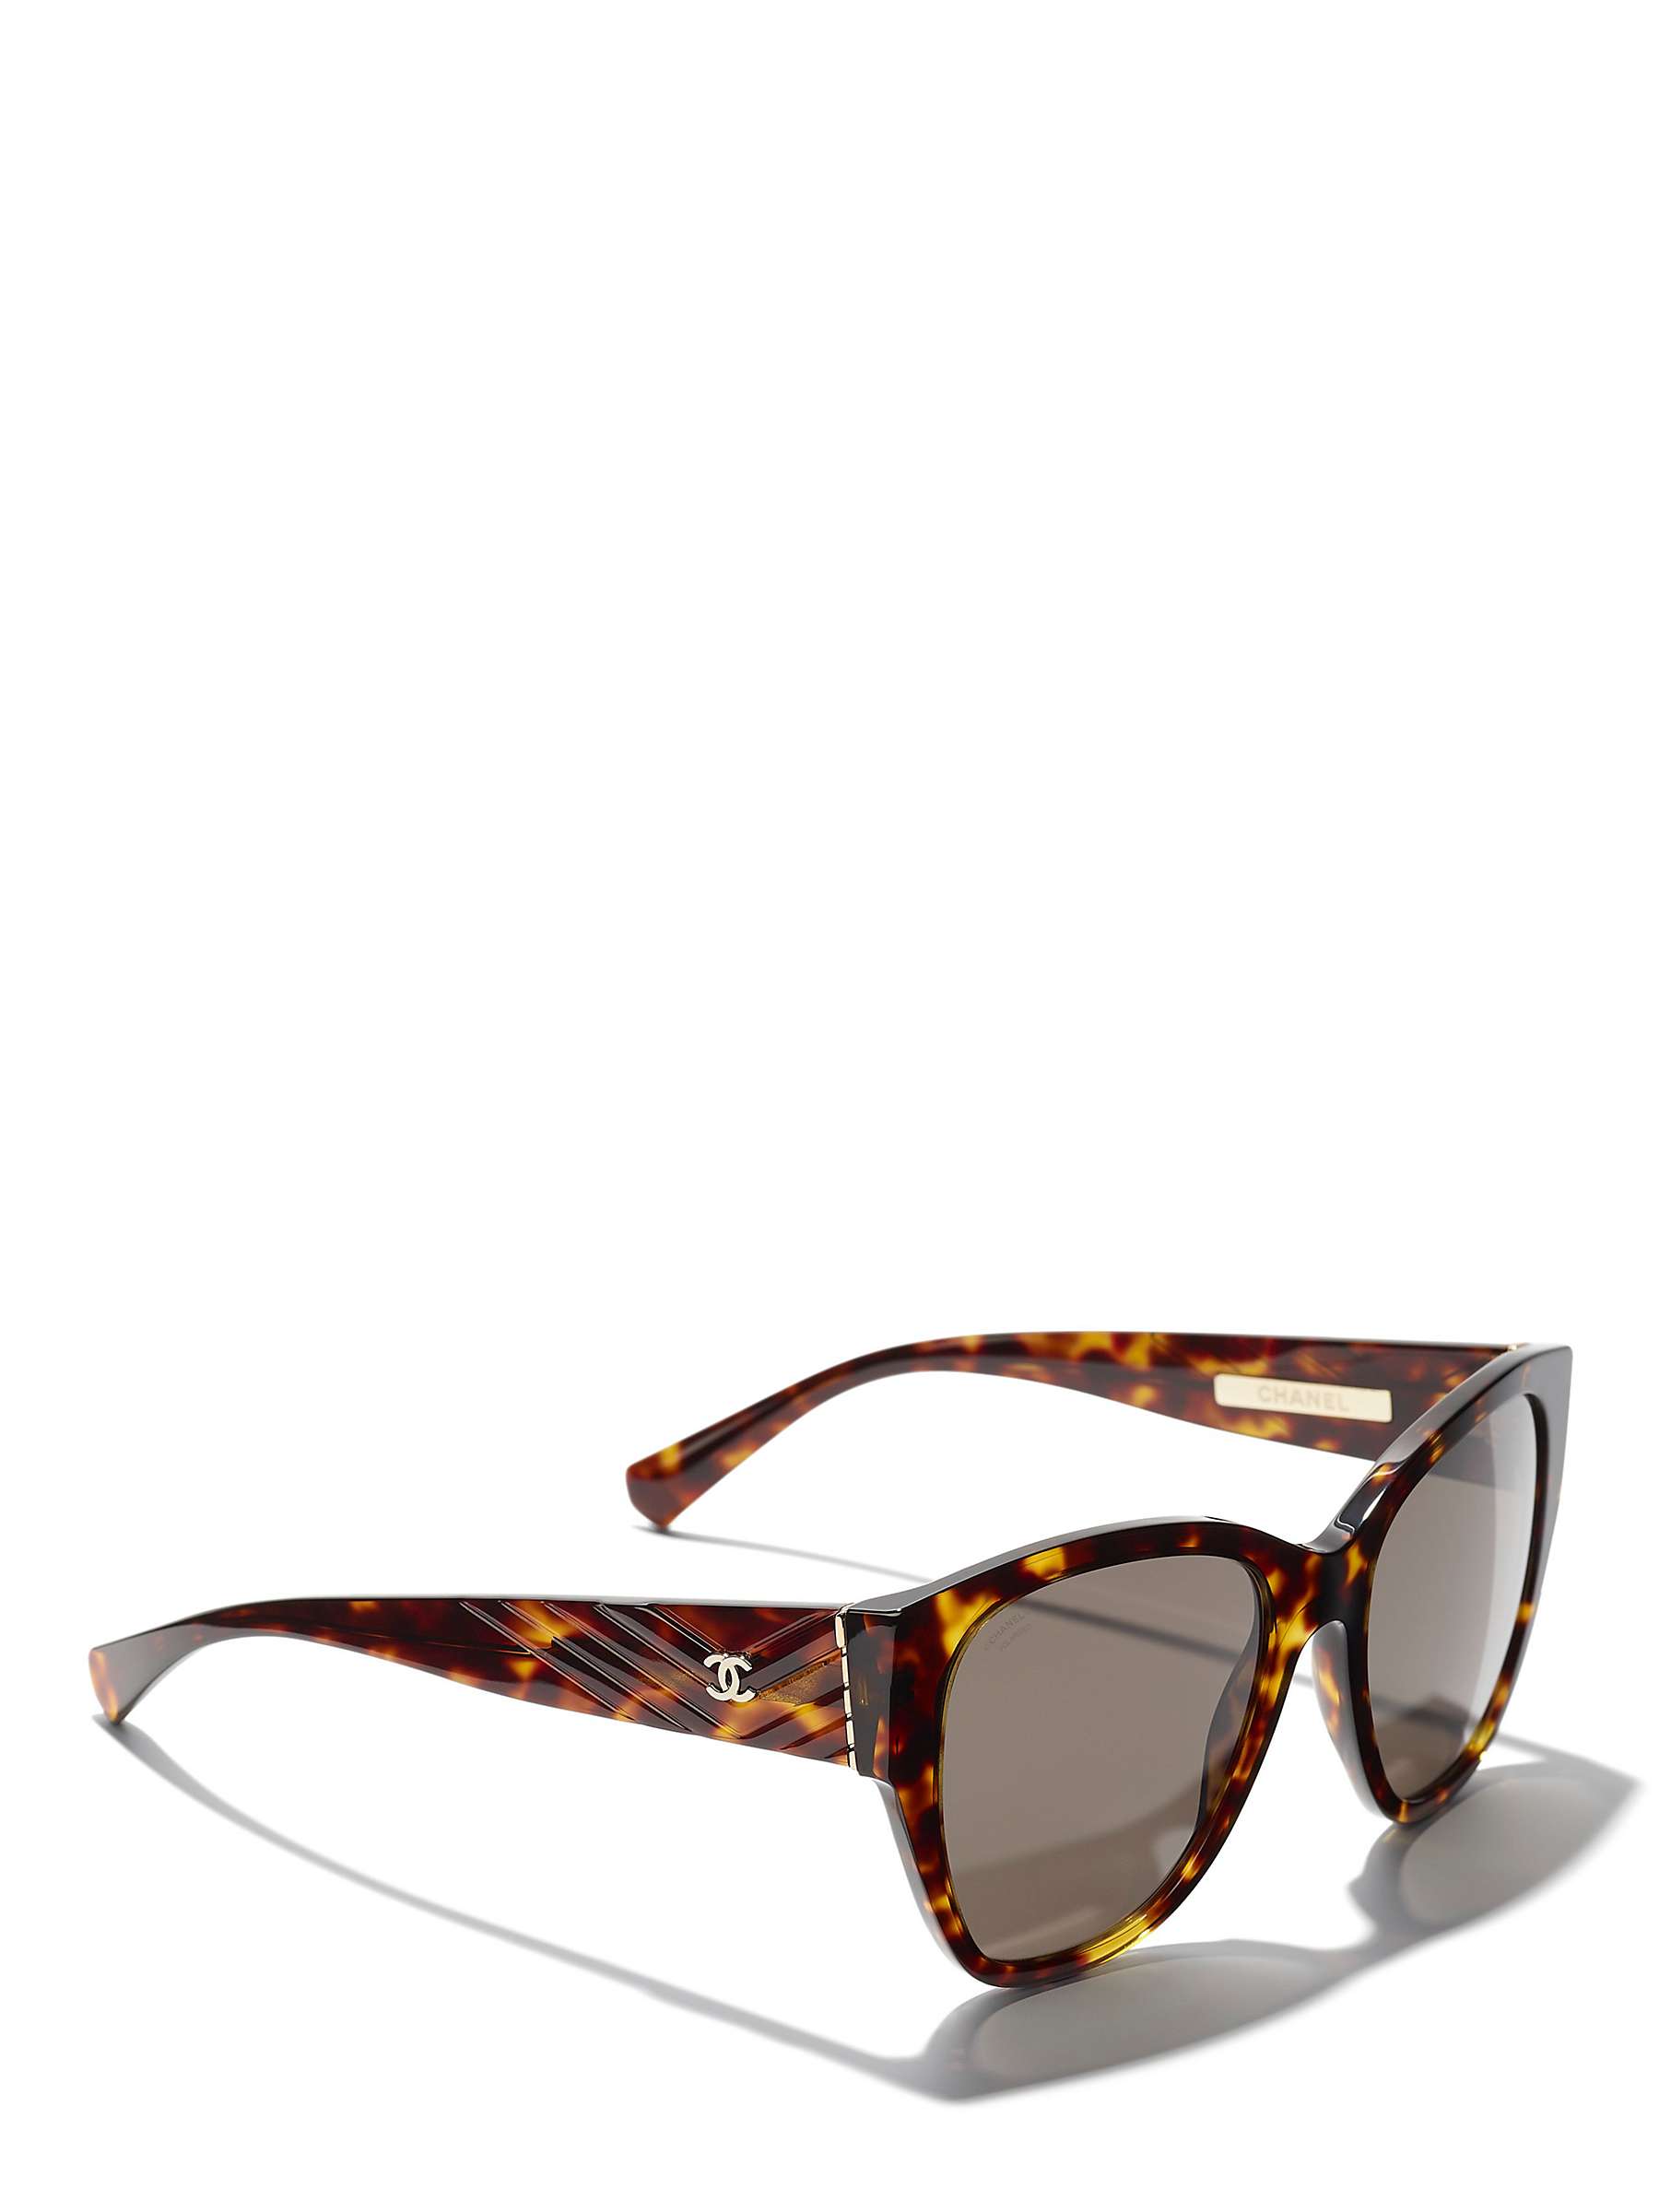 Buy CHANEL Polarised Butterfly Sunglasses CH5412 Havana/Brown Online at johnlewis.com